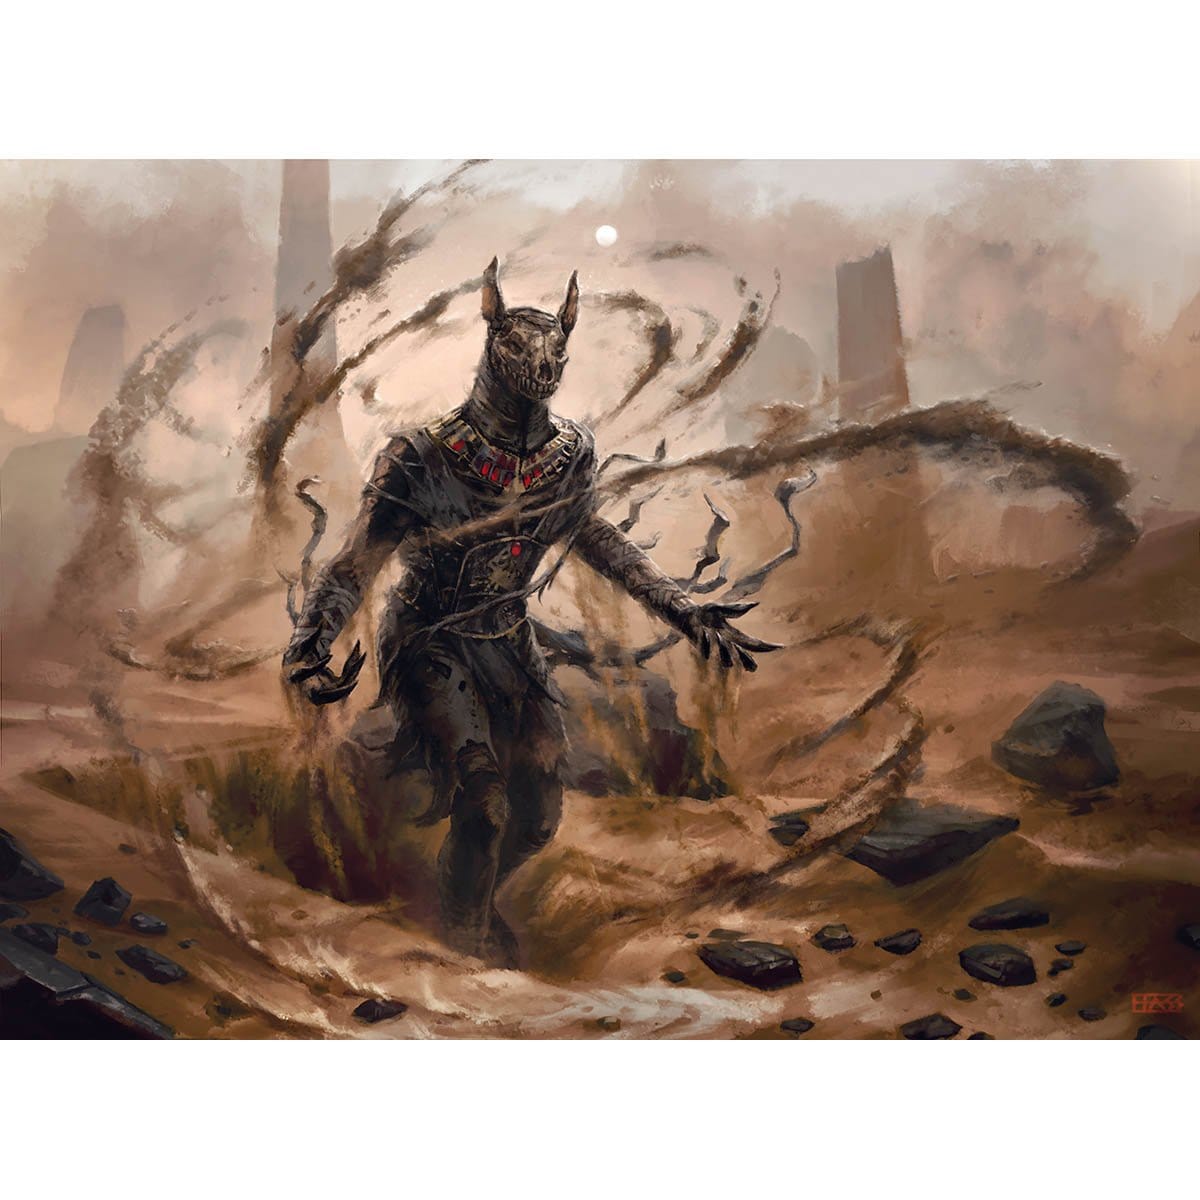 Dread Wanderer Print - Print - Original Magic Art - Accessories for Magic the Gathering and other card games